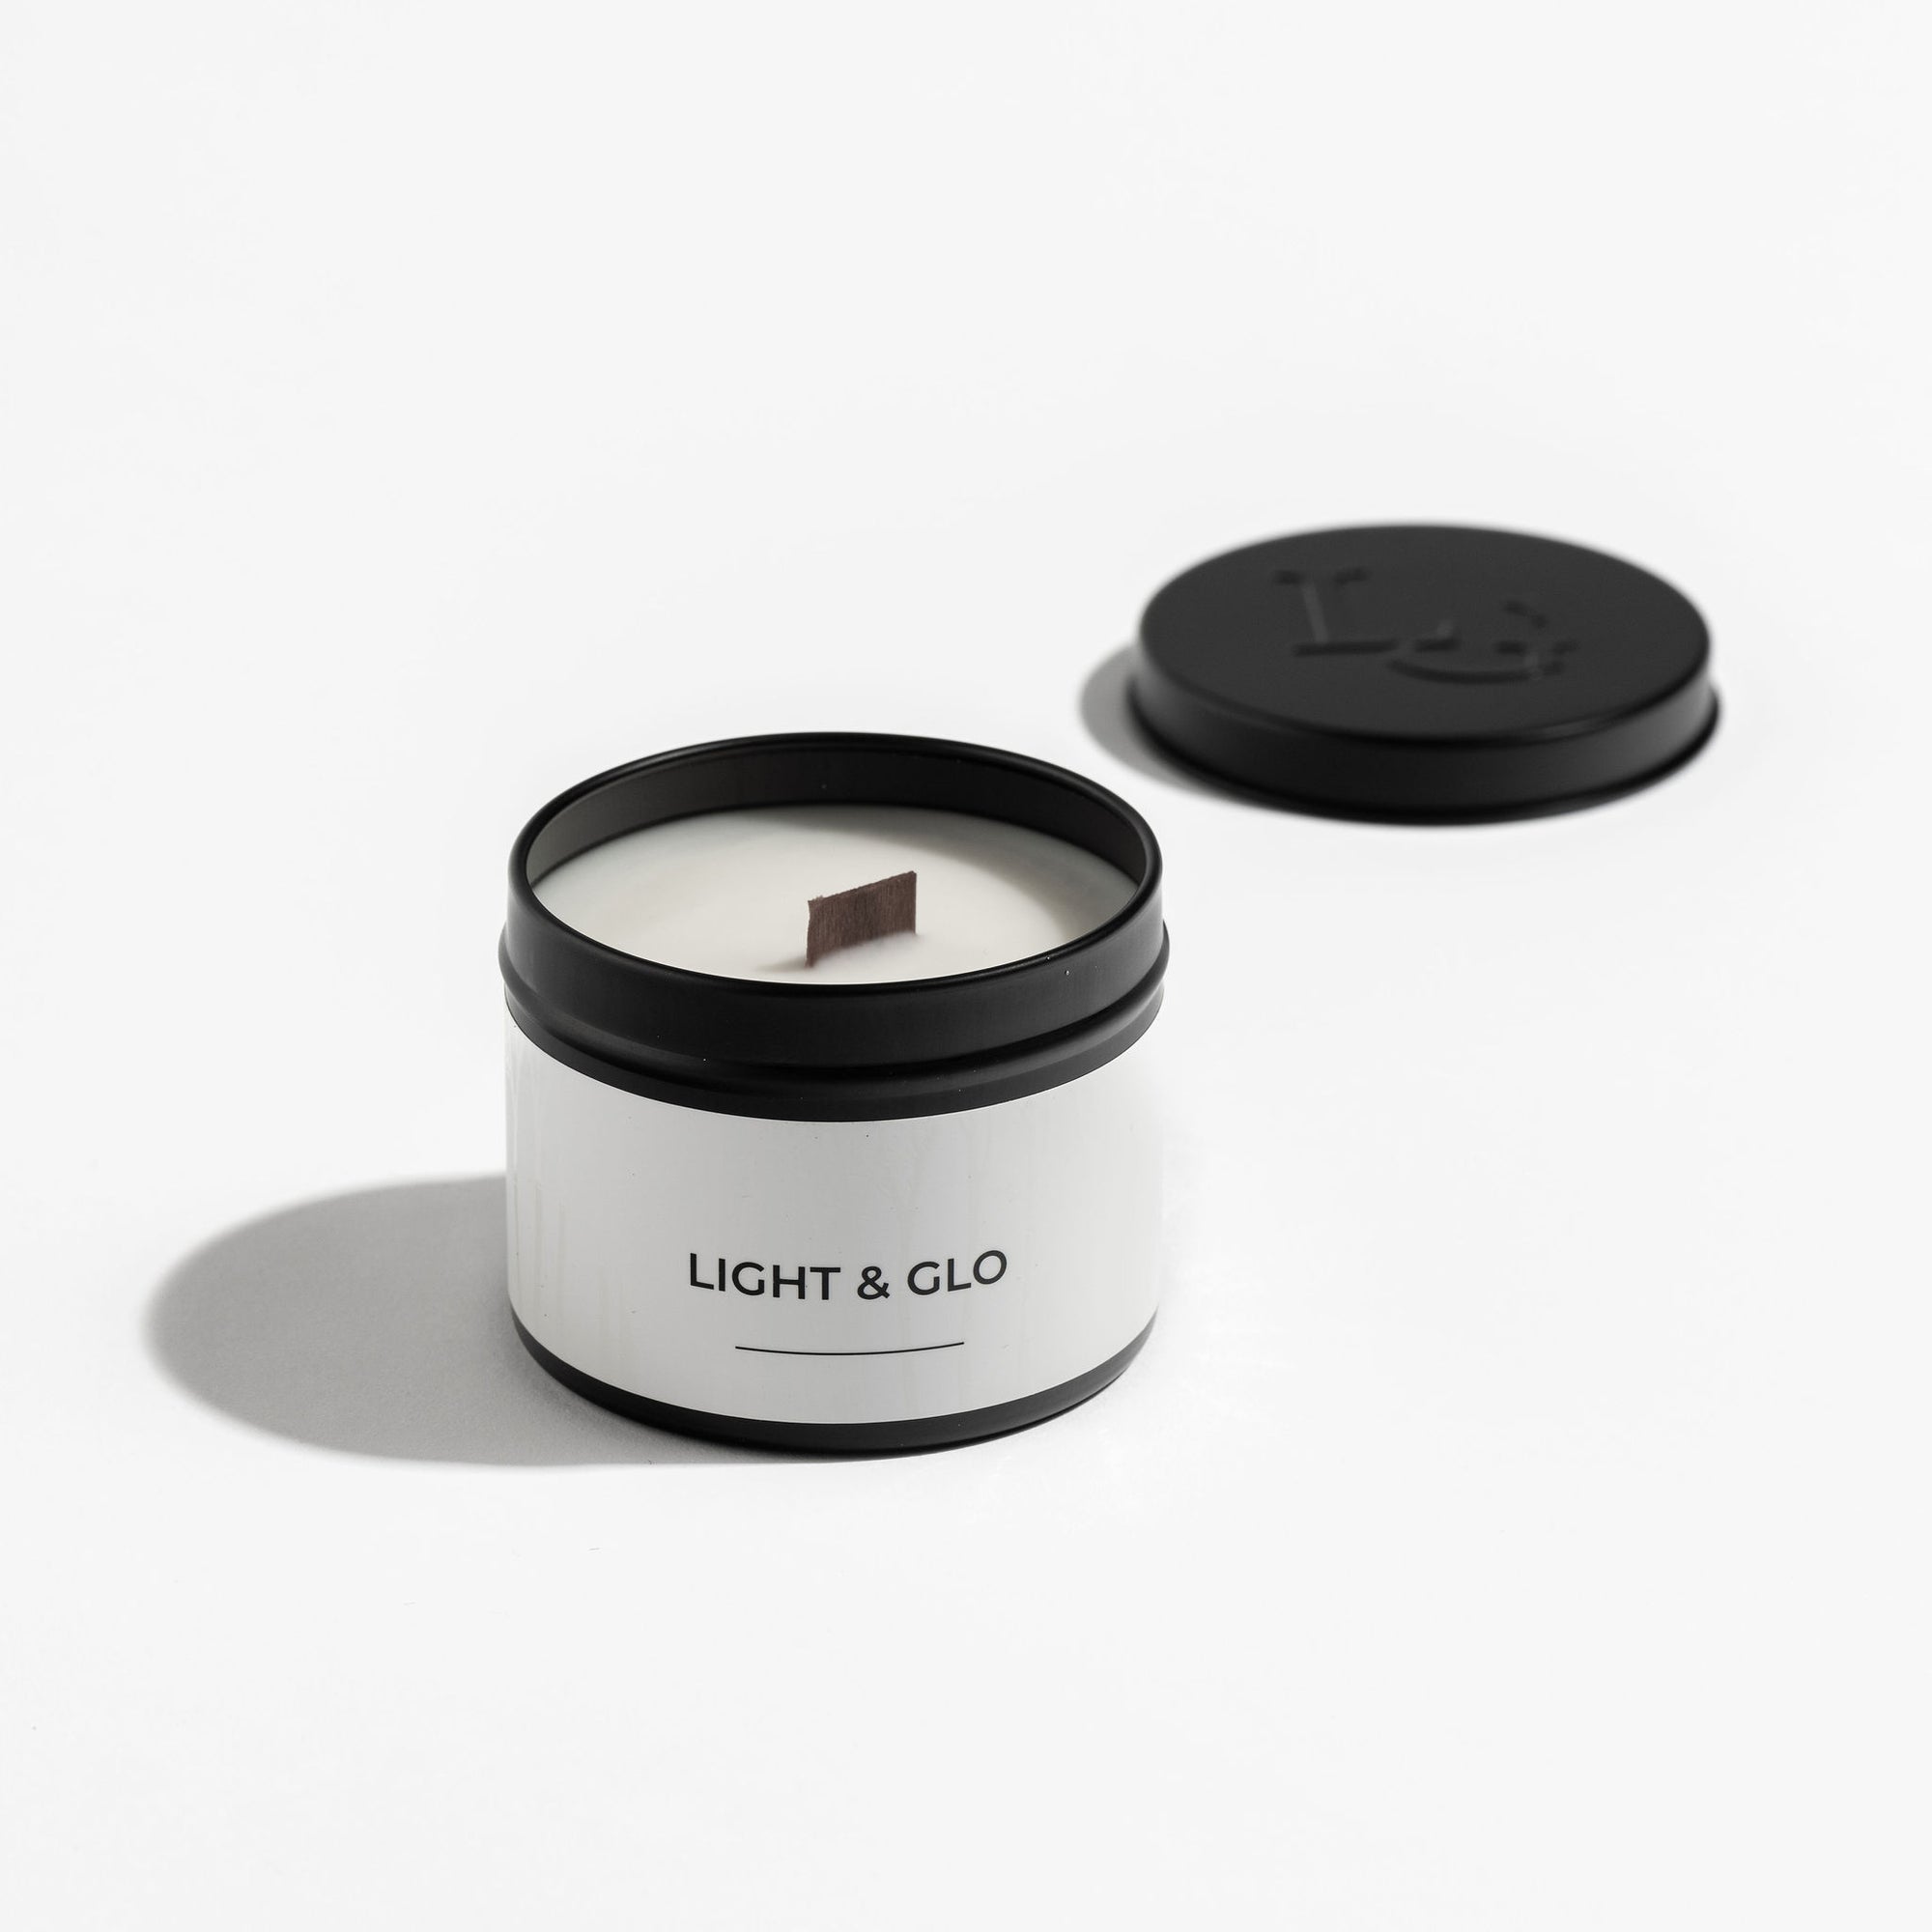 Lemongrass & Persian Lime - Monochrome Travel Candle | Luxury Candles & Home Fragrances by Light + Glo